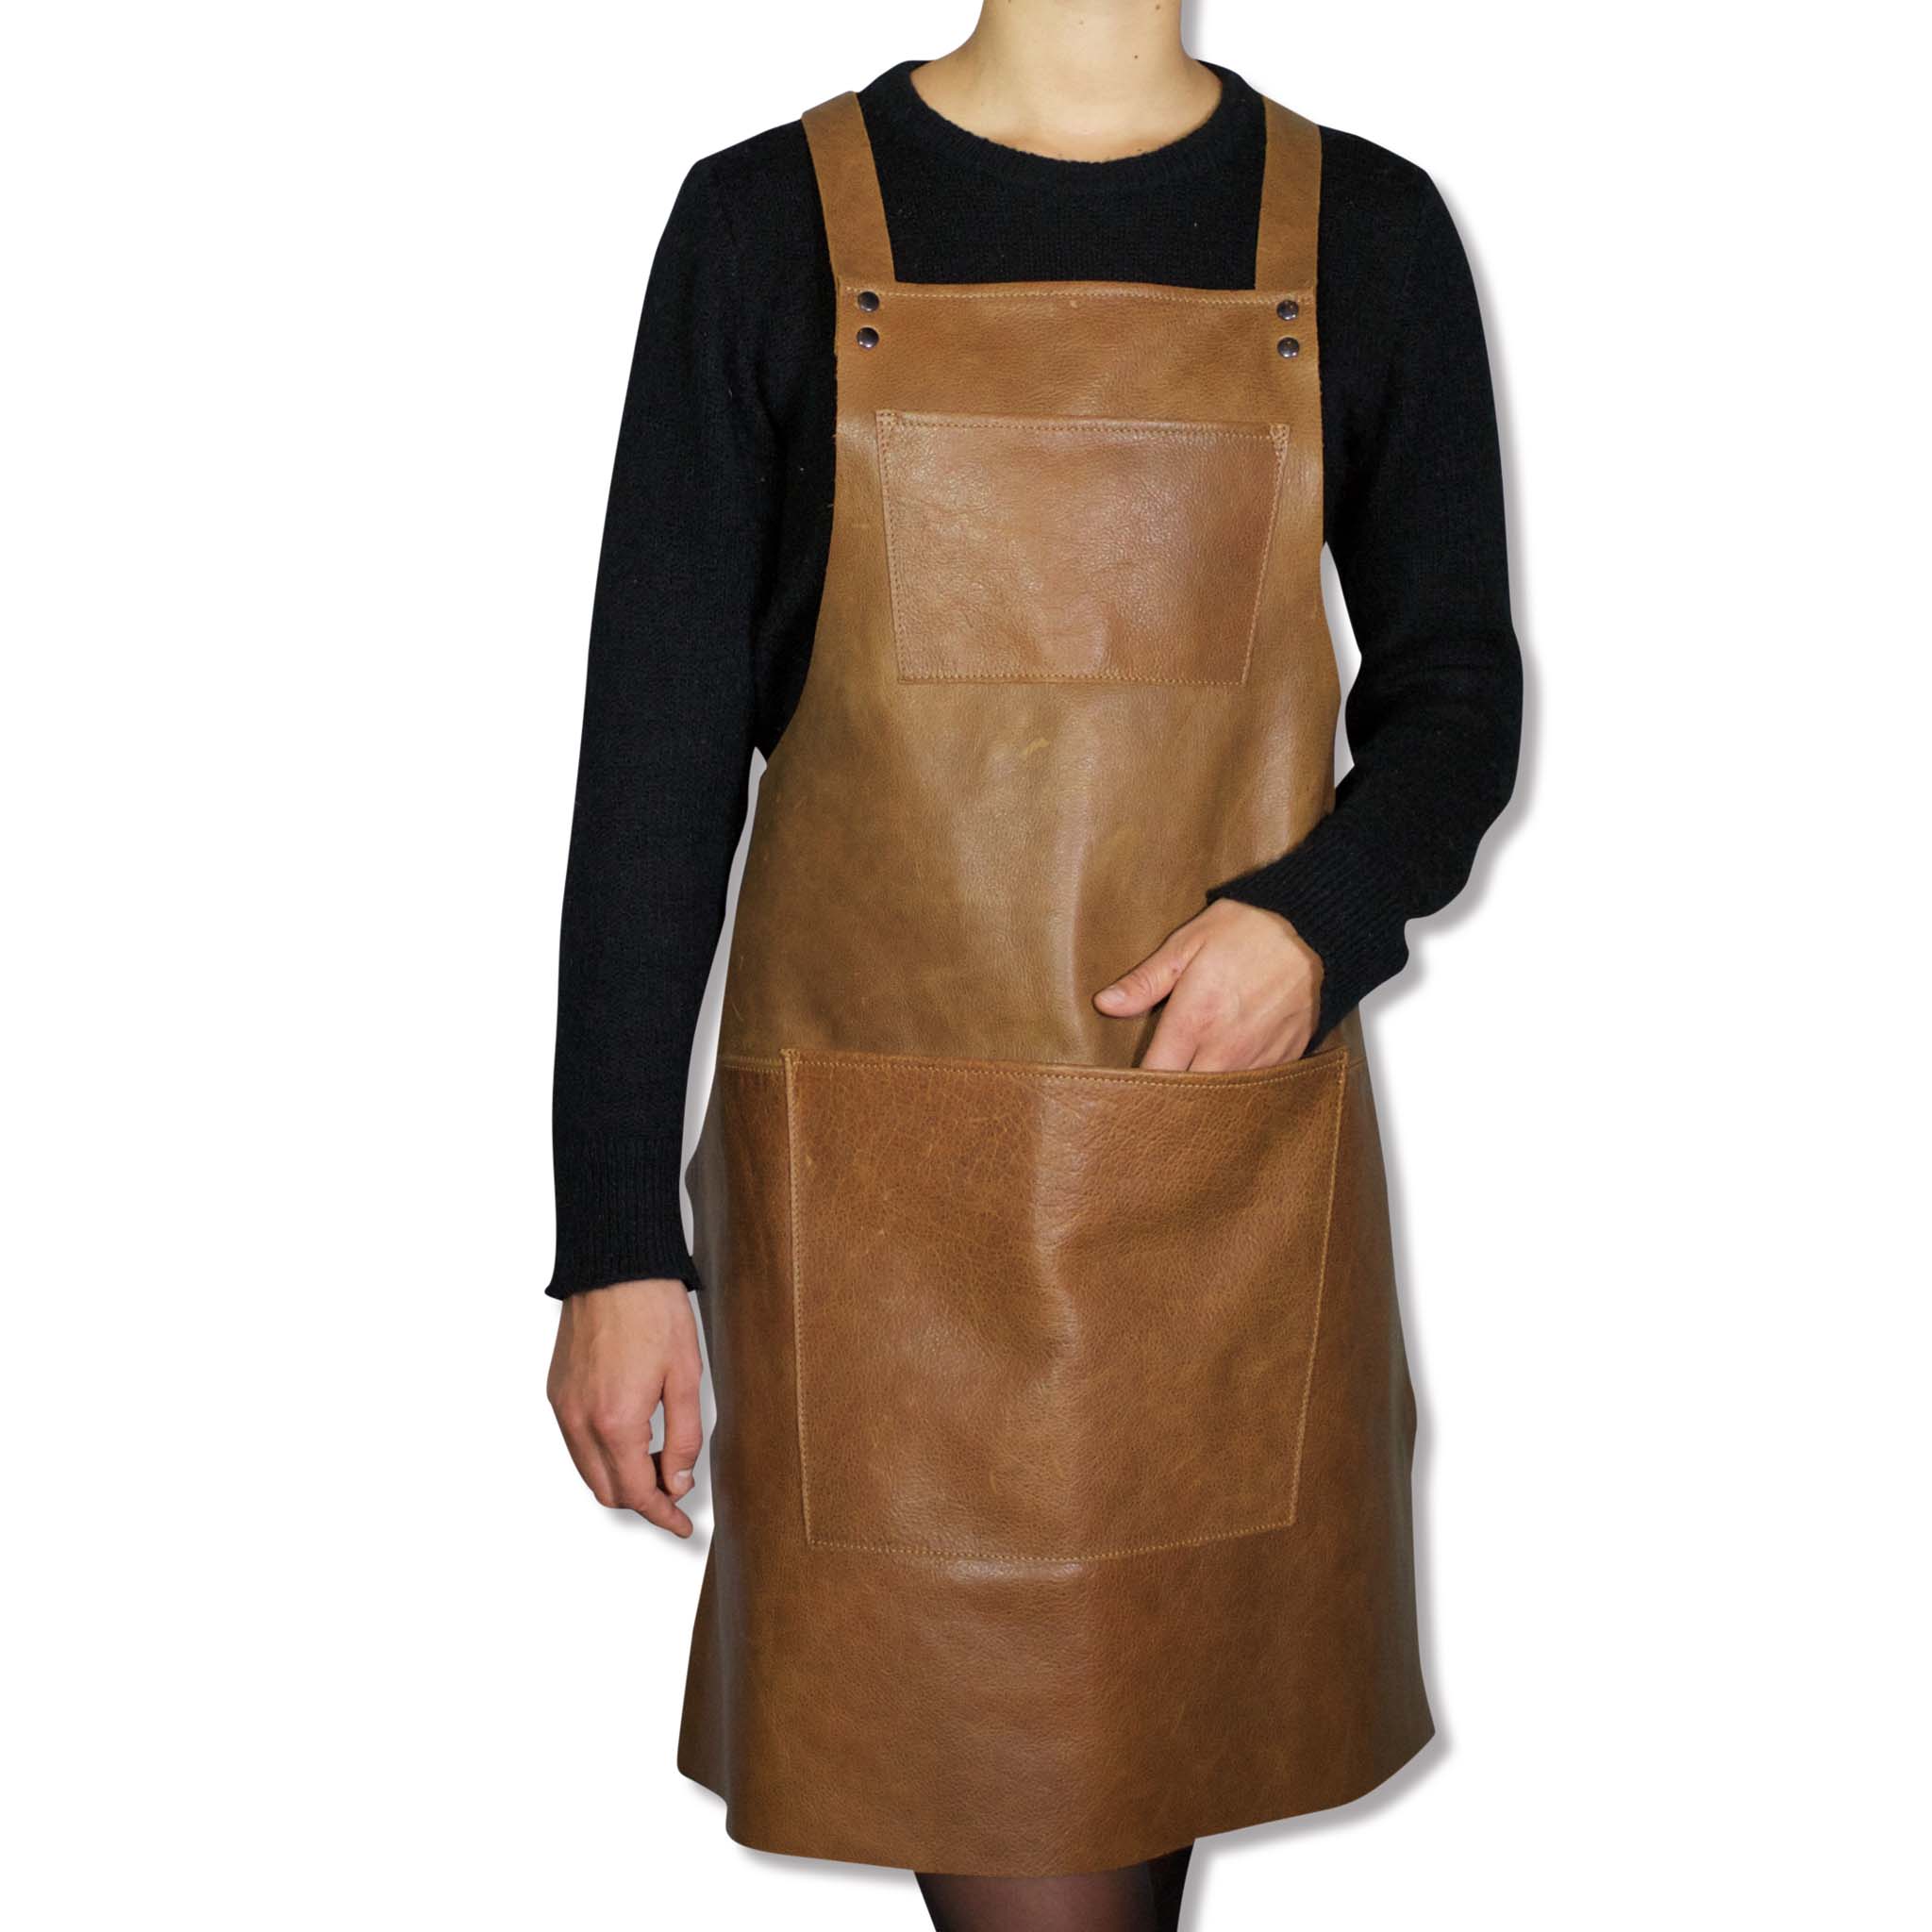 Dutchdeluxes Leather Suspender Apron in Vintage Camel Cookware Kitchen Clothing